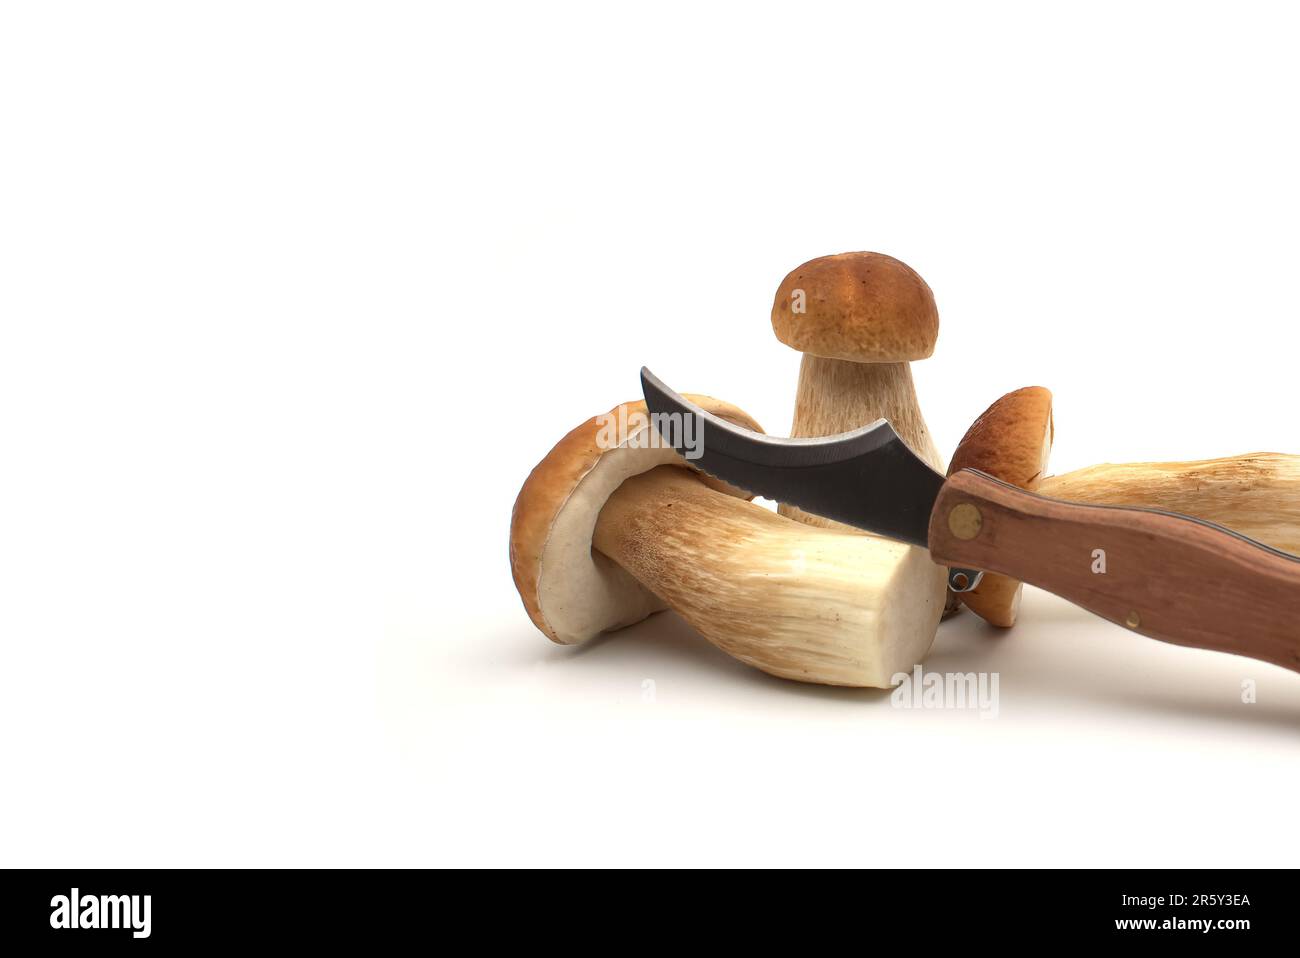 https://c8.alamy.com/comp/2R5Y3EA/penny-bun-boletus-edulis-mushrooms-near-knife-with-curved-blade-and-small-brush-specially-for-picking-fungi-isolated-on-white-background-2R5Y3EA.jpg